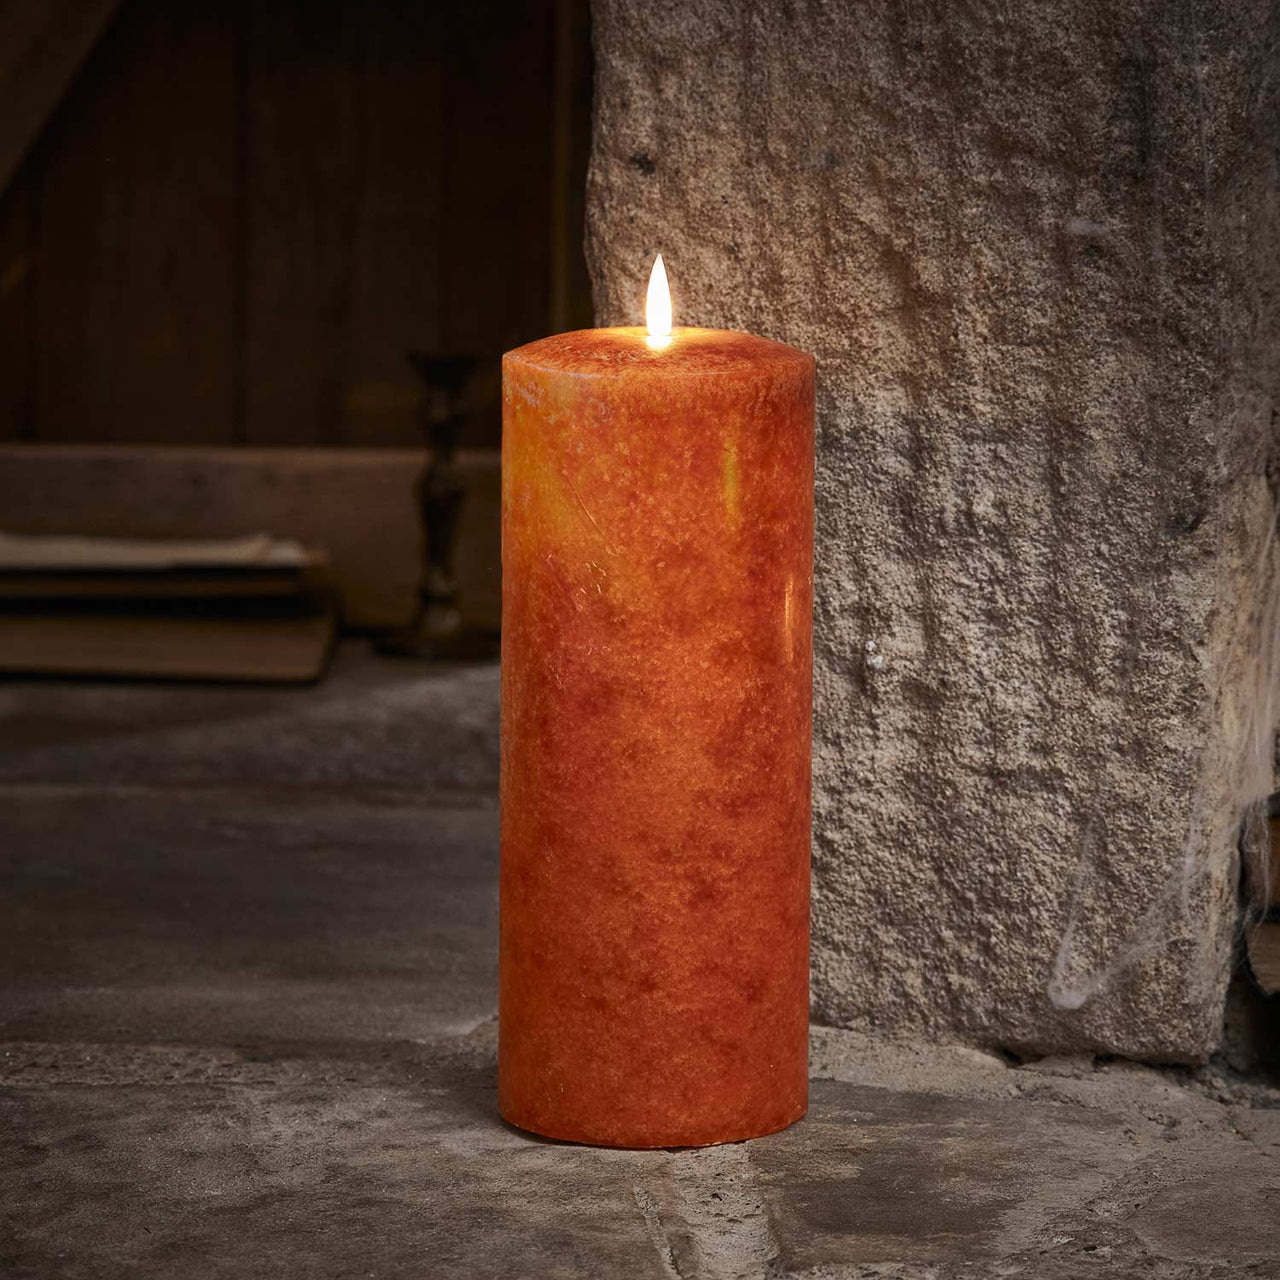 25cm TruGlow® Mottled Orange LED Chapel Candle with Remote Control